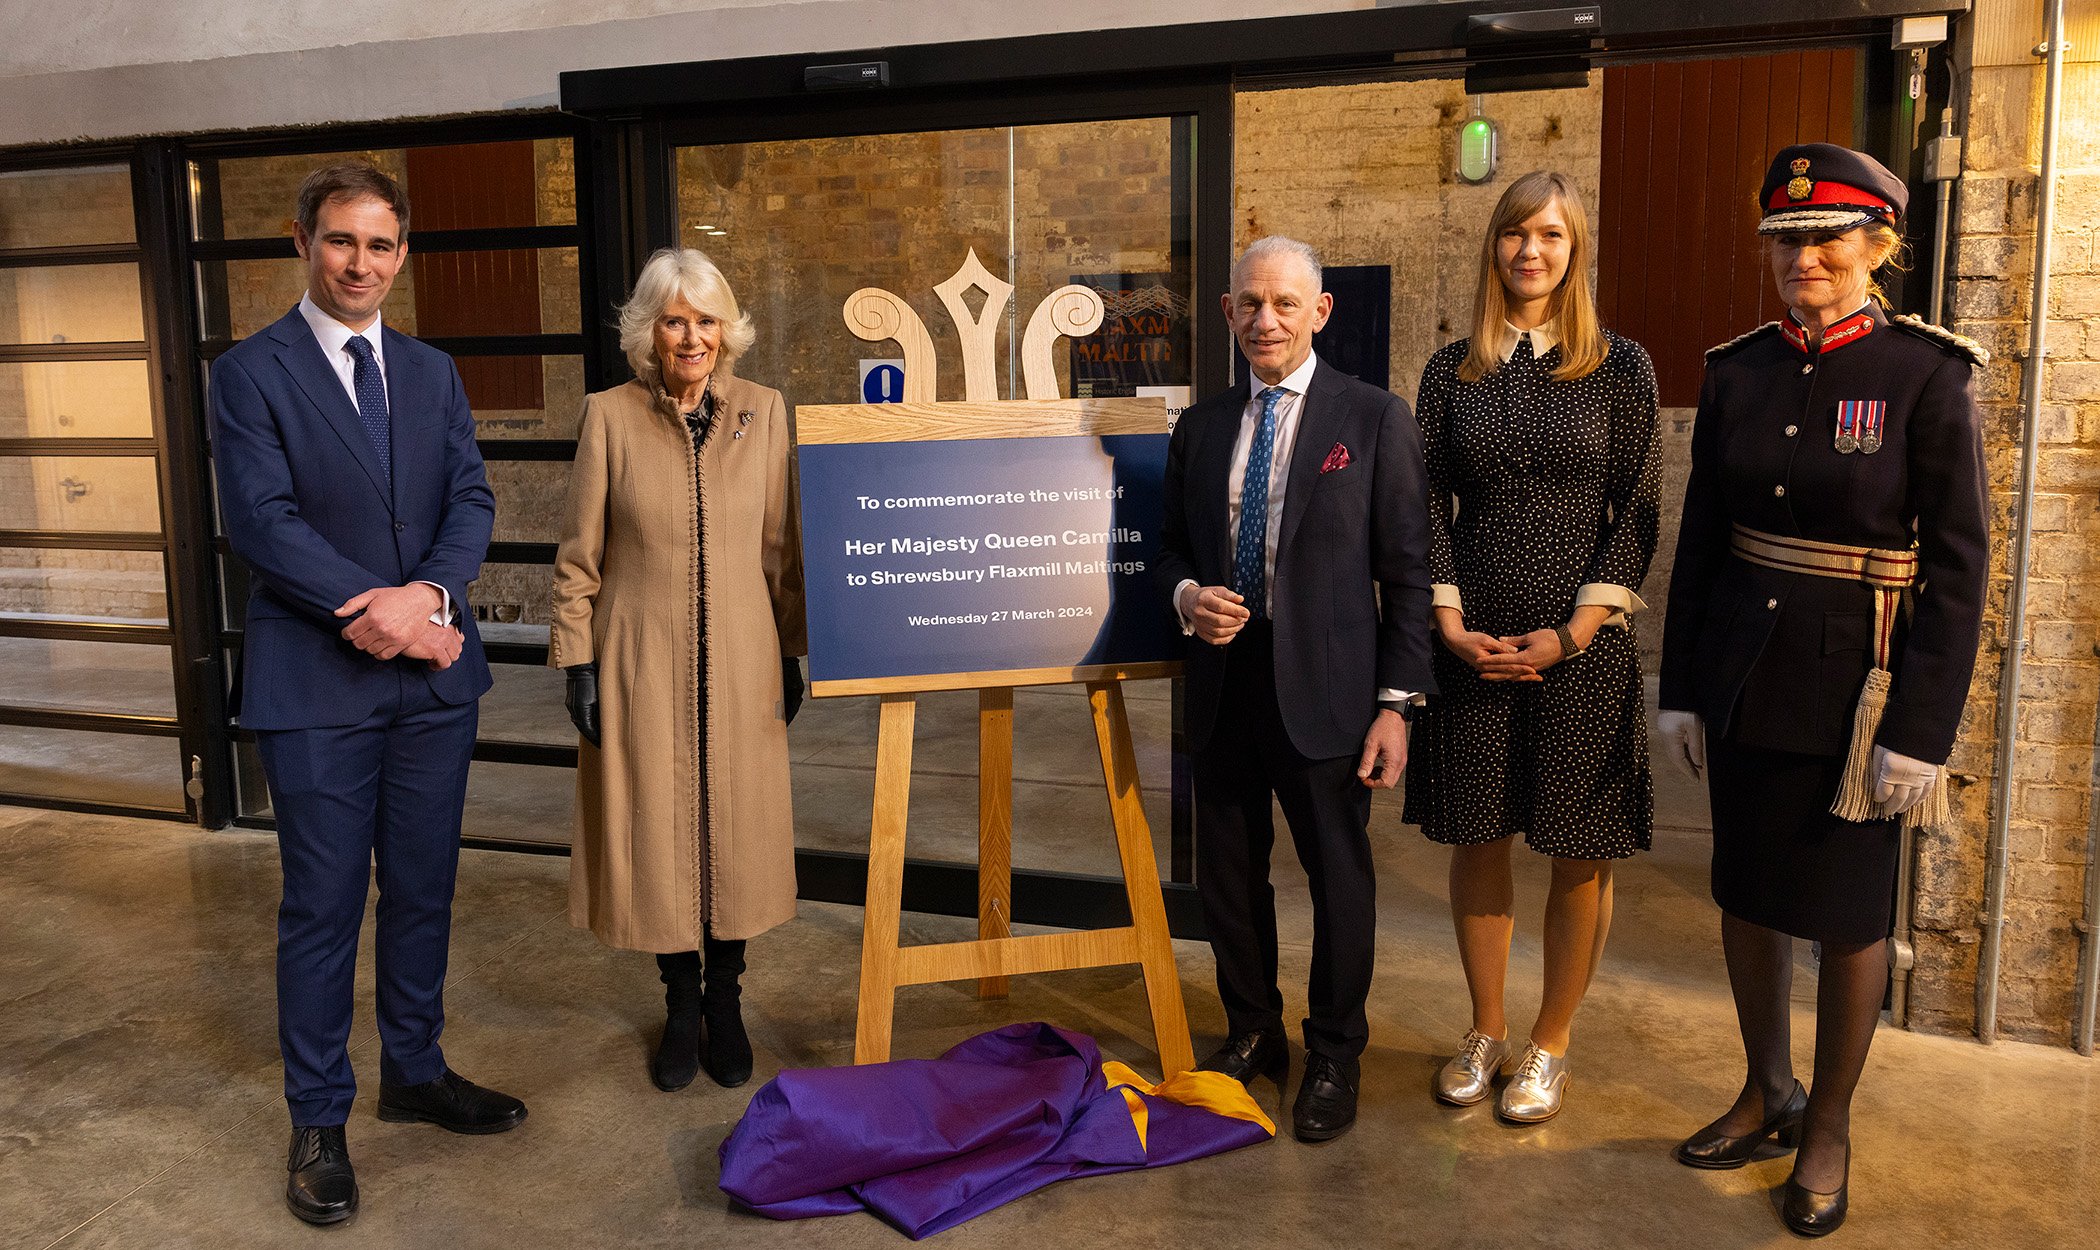 A photograph of five people stood next to a plaque being unveiled on a wooden easel